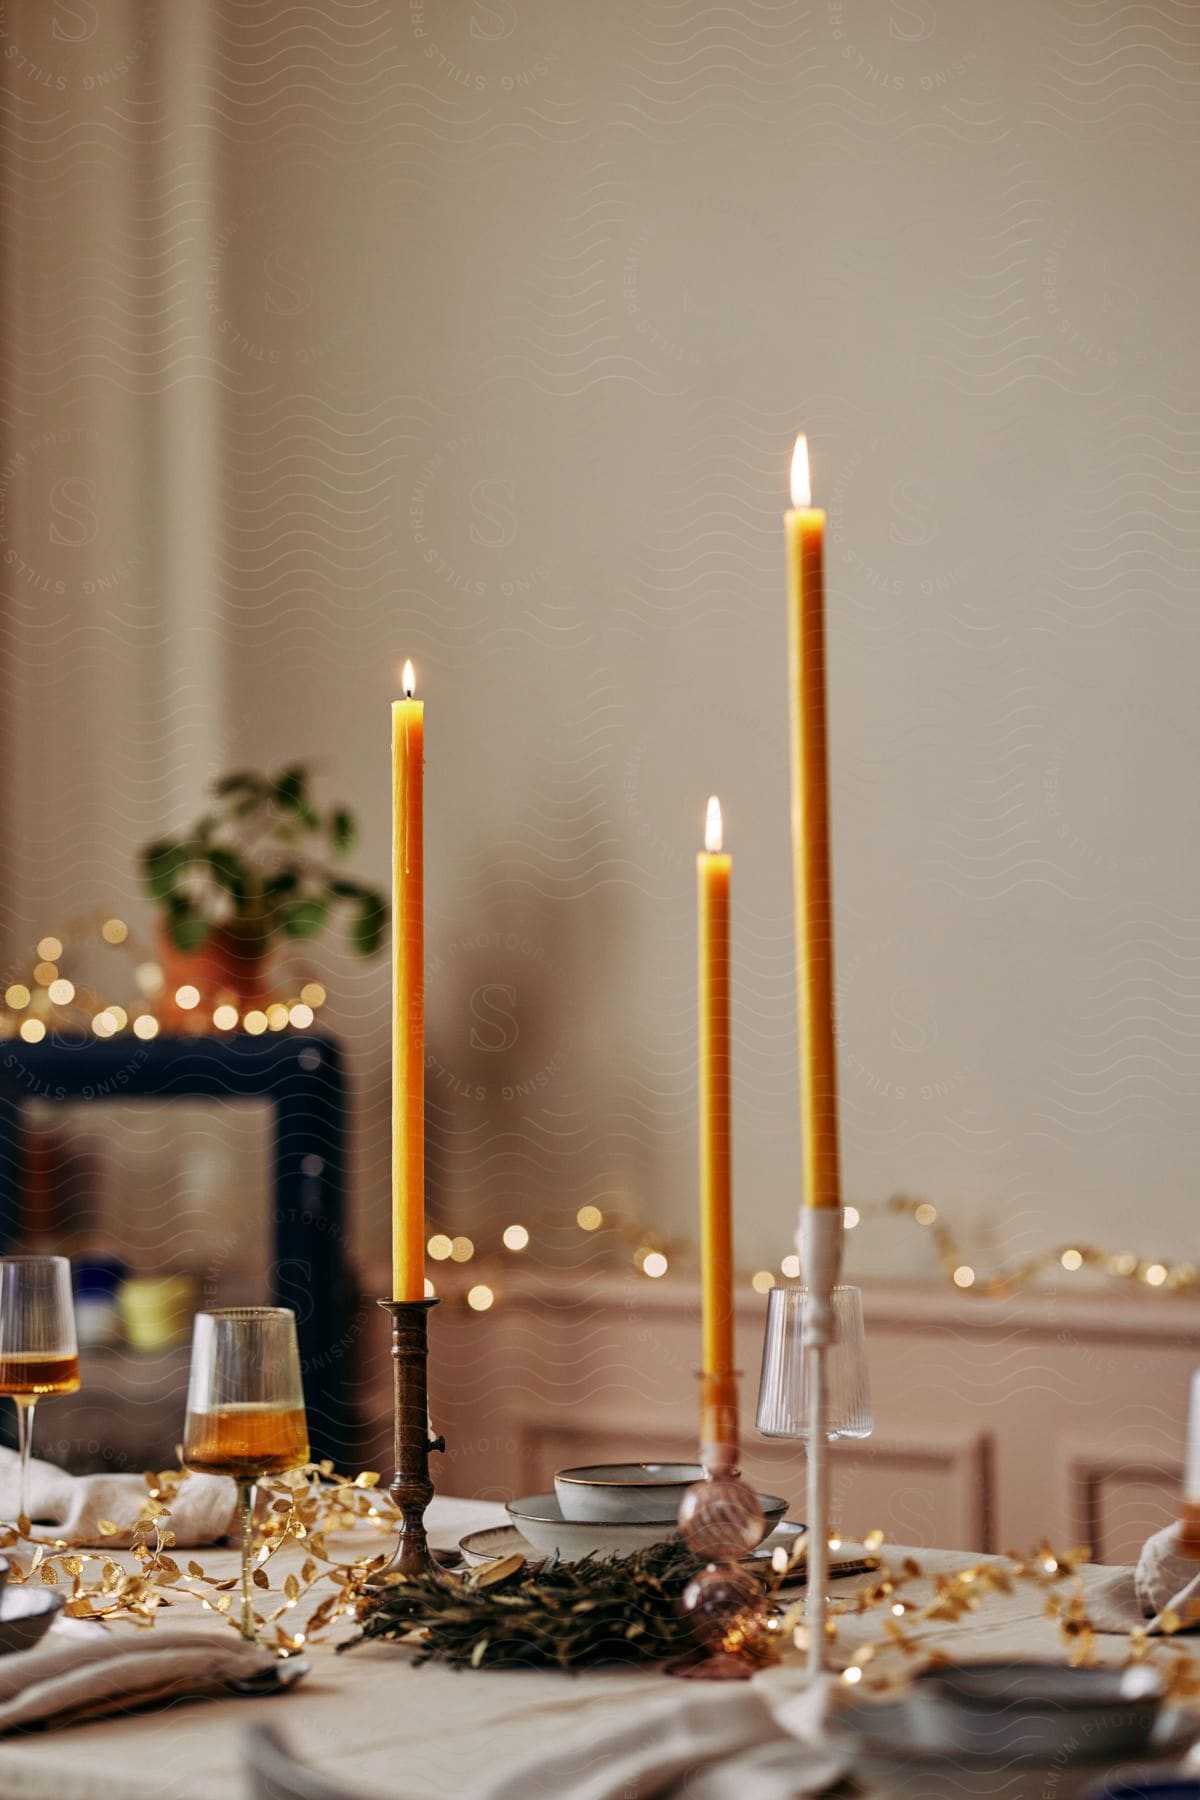 Stock photo of a dining table set up with wine in glasses, plates and candles on candle stands and some deco lights on the background